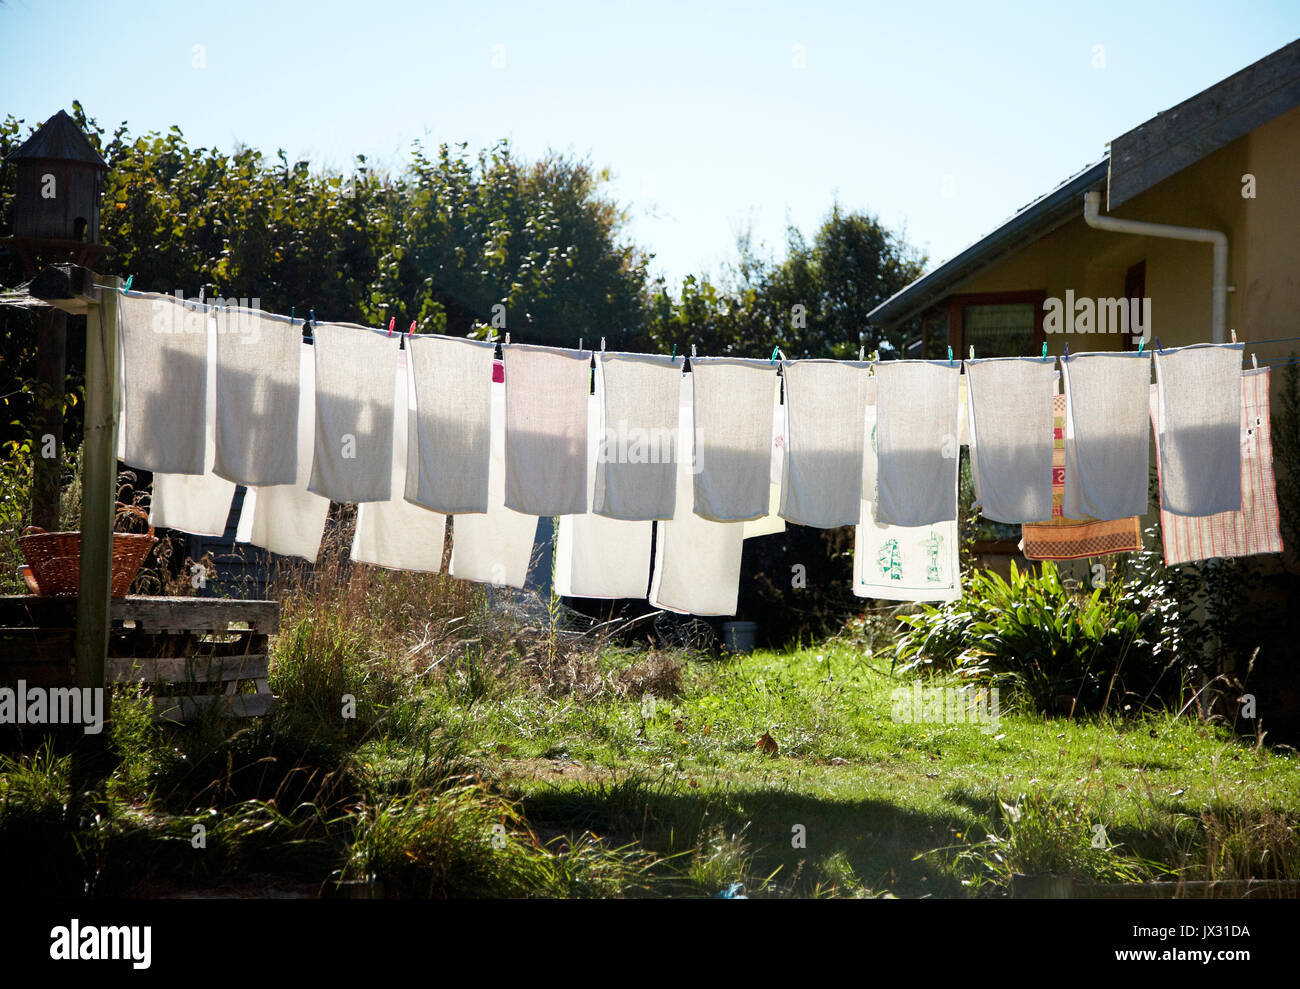 Nappies hanging out to dry Stock Photo